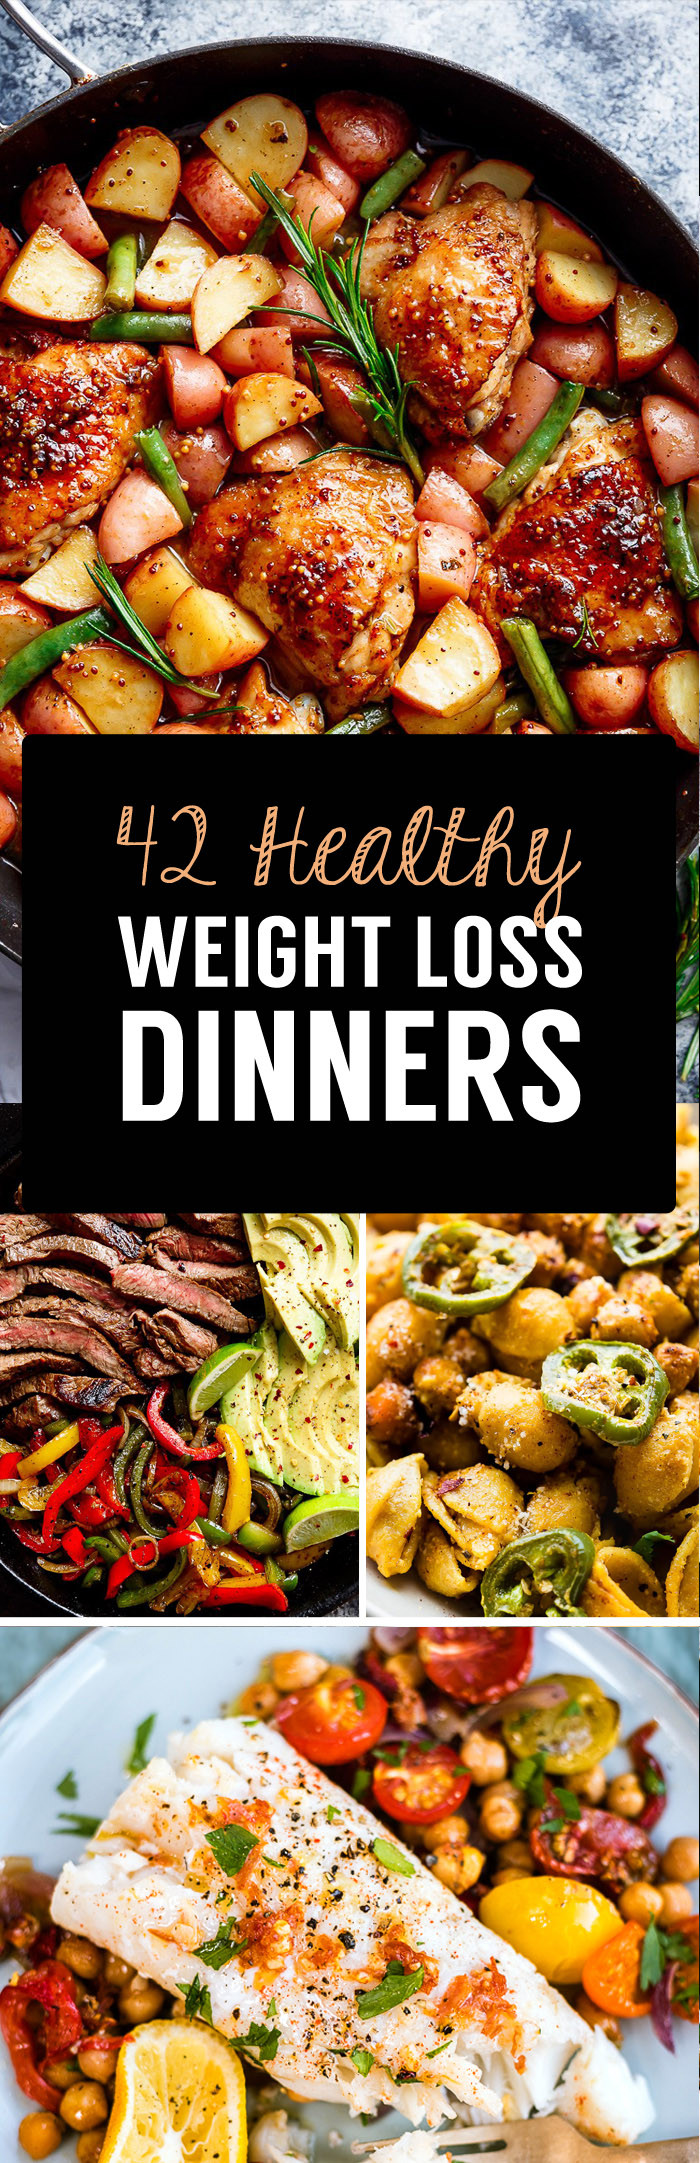 Quick Weight Loss Dinner
 42 Weight Loss Dinner Recipes That Will Help You Shrink